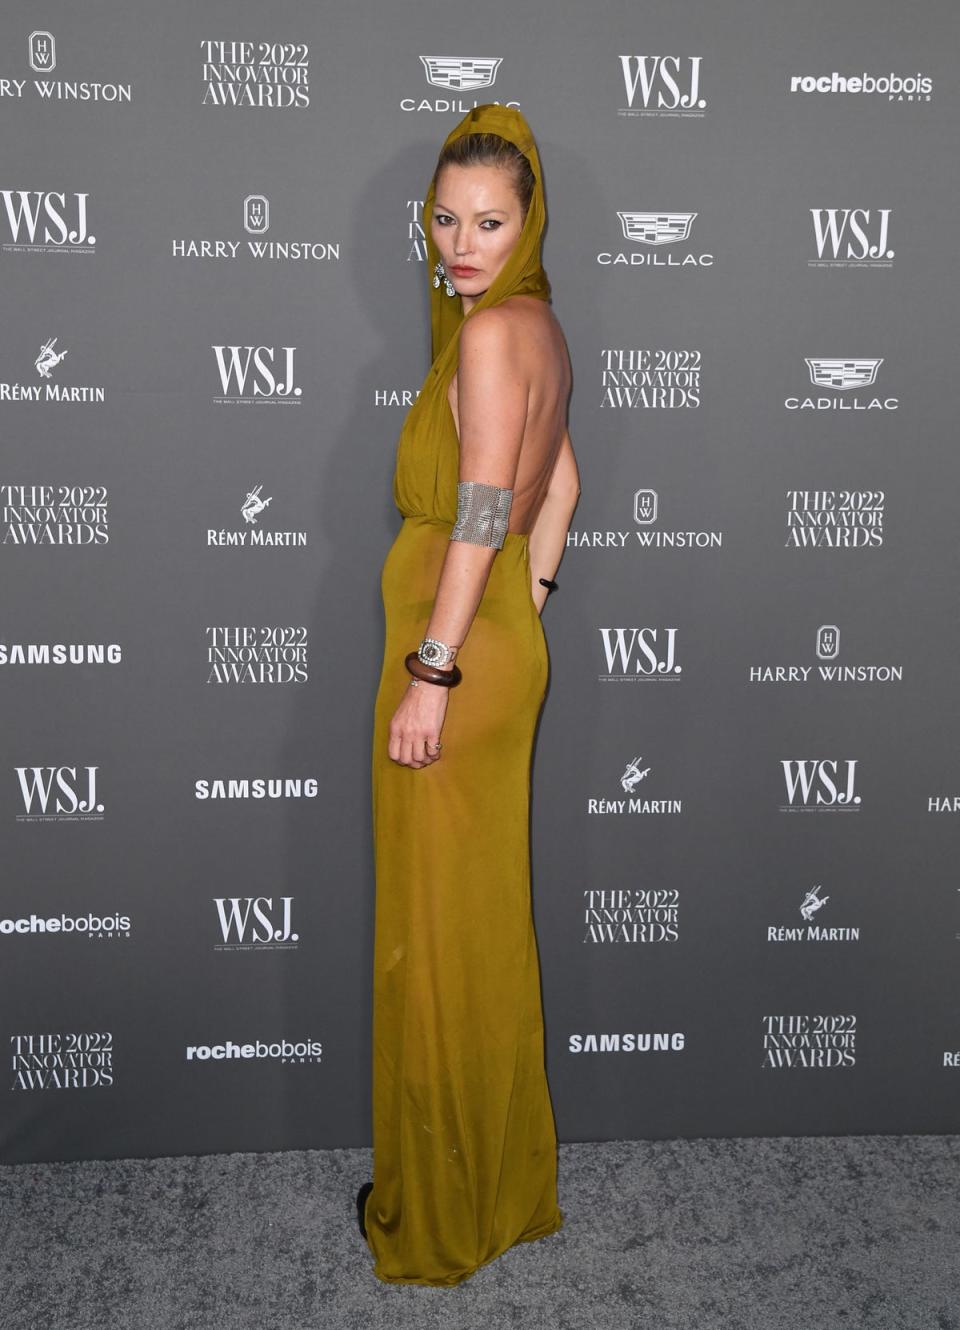 at the Wall Street Journal Magazine 2022 Innovator awards at the Museum of Modern Art (MoMA) in New York City on November 2, 2022 (AFP via Getty Images)